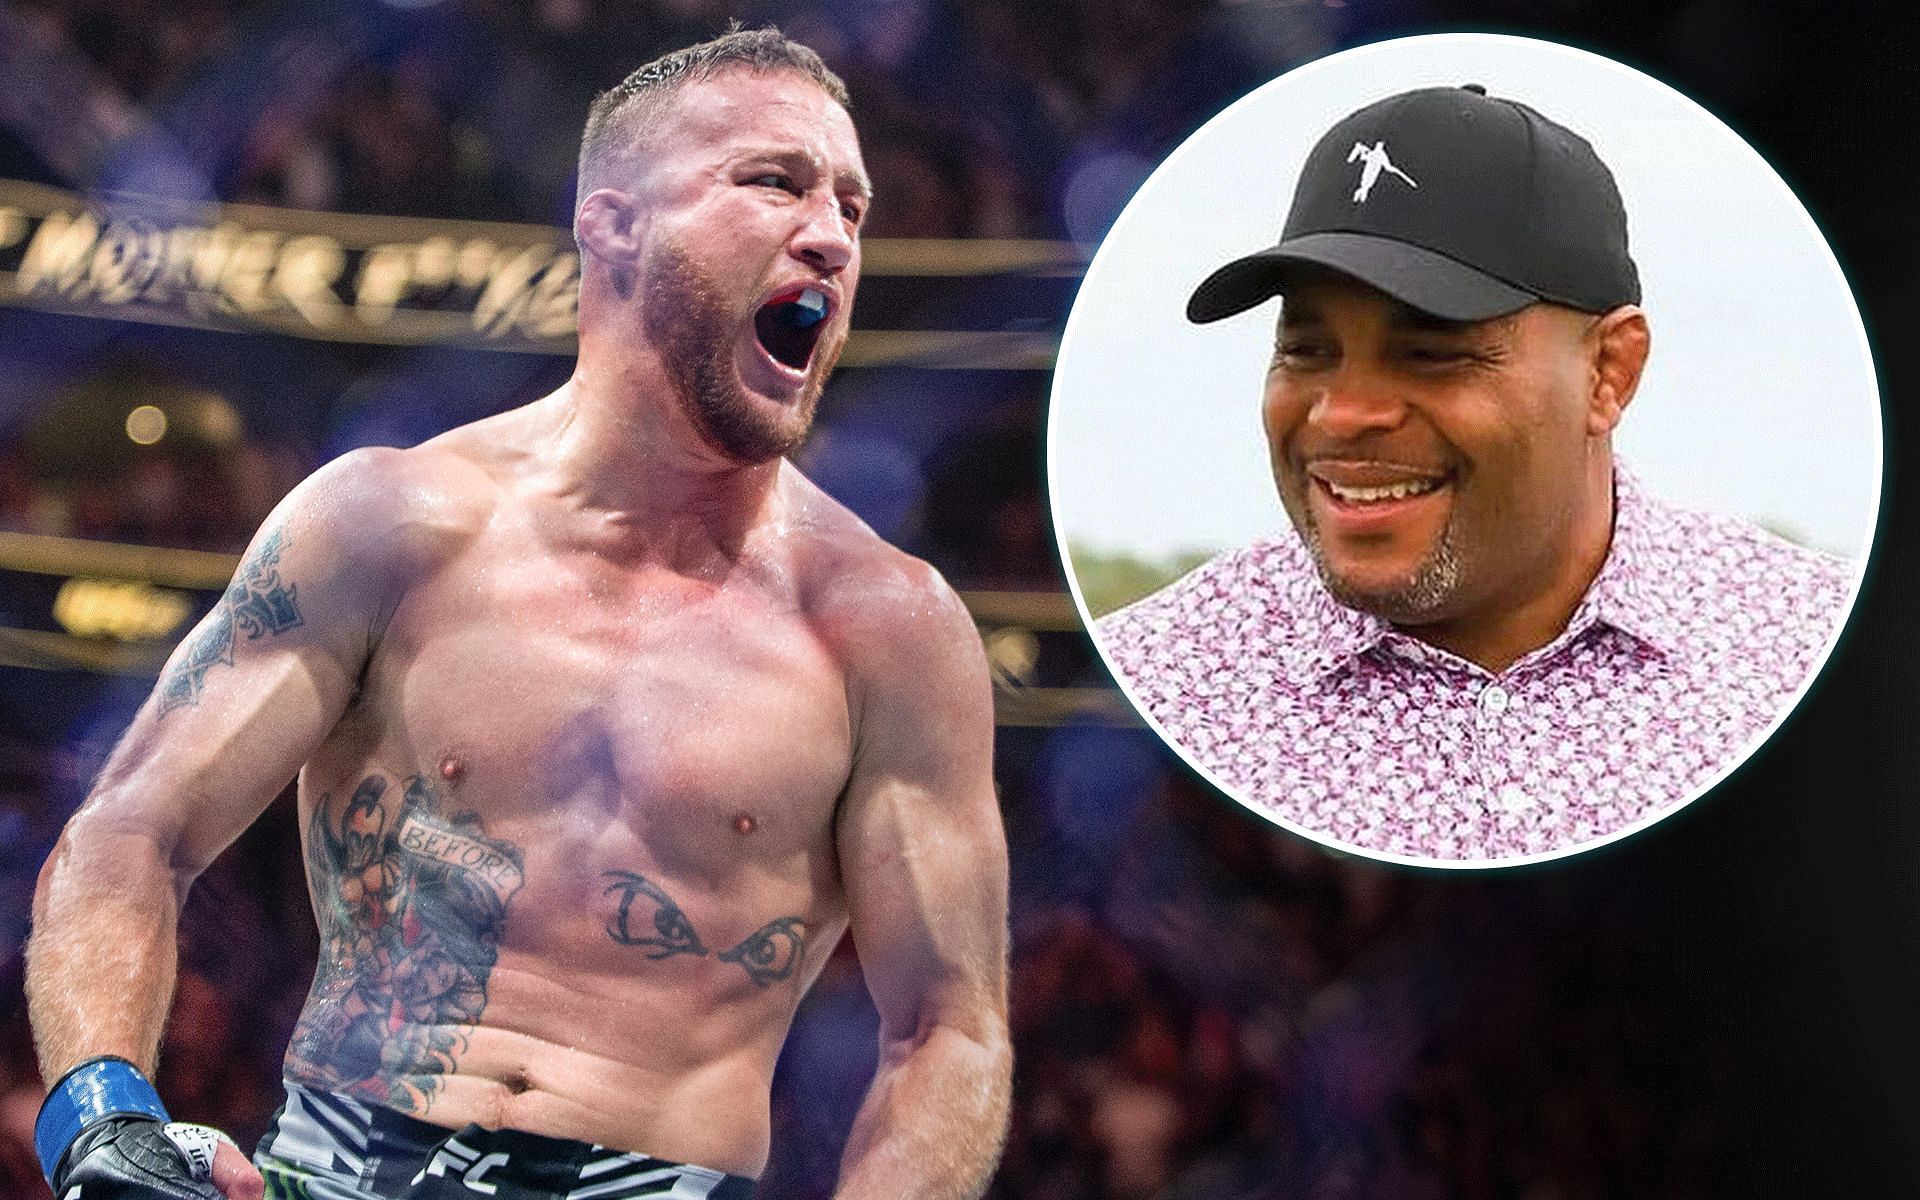 Daniel Cormier (right) still believes Justin Gaethje (left) can get a title shot [Images courtesy: @dc_mma on Instagram and Getty]